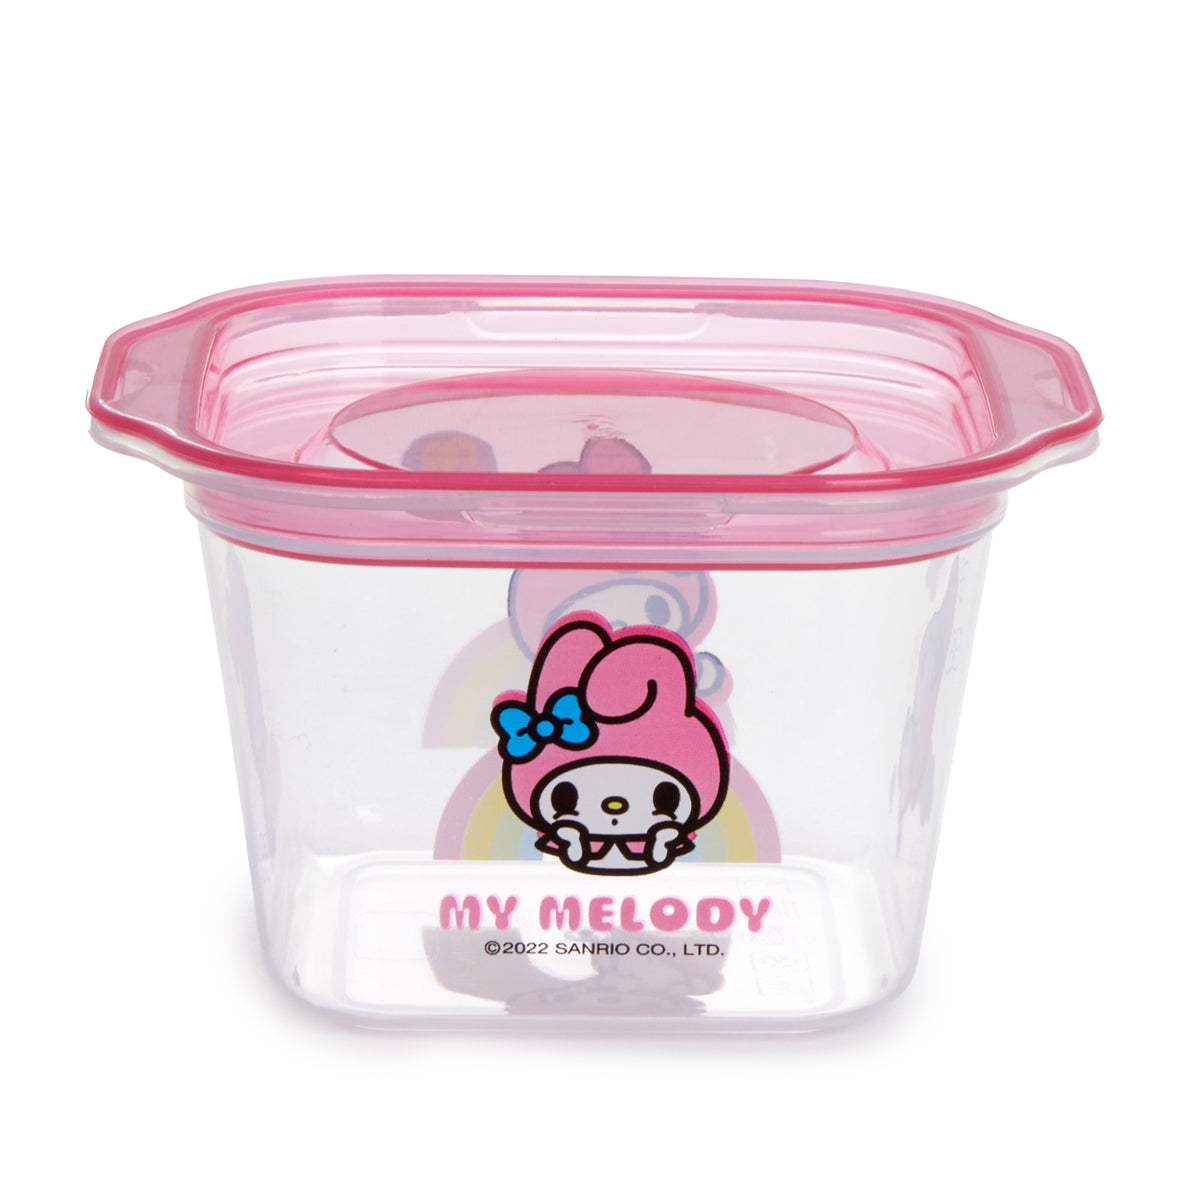 Hello Kitty® Lidded Glass Containers, Set of 2